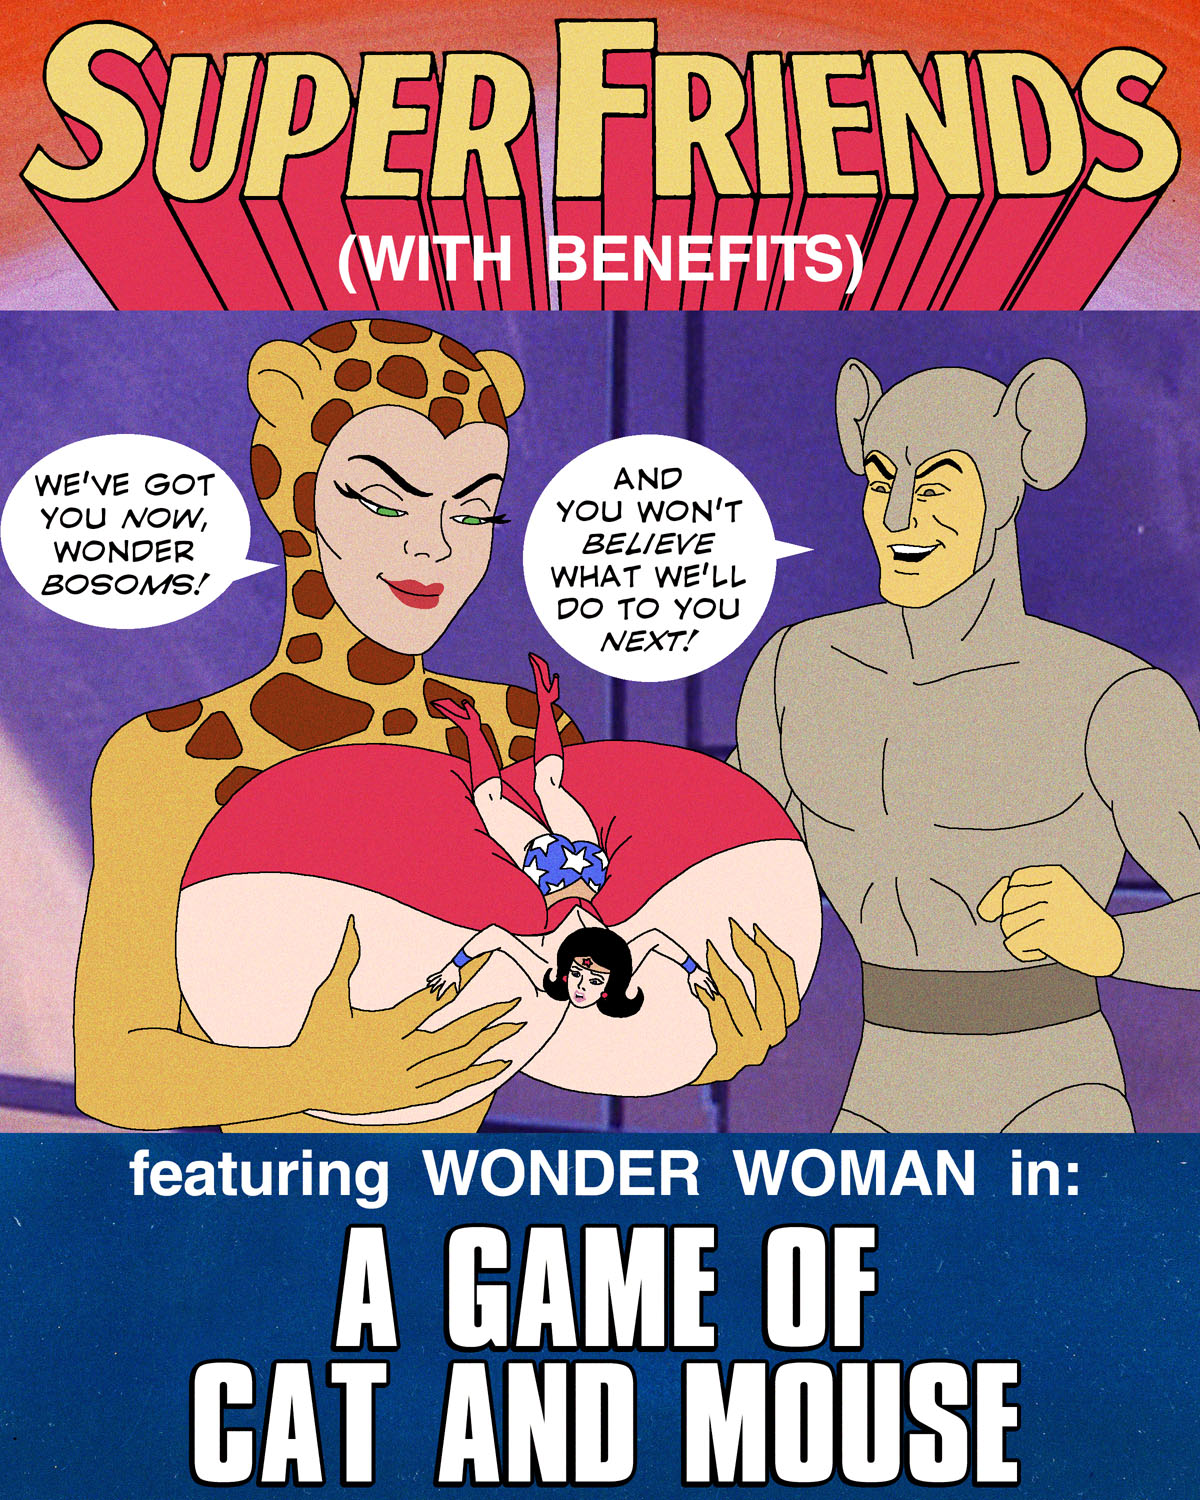 A Game of Cat and Mouse – Super Friends with Benefits